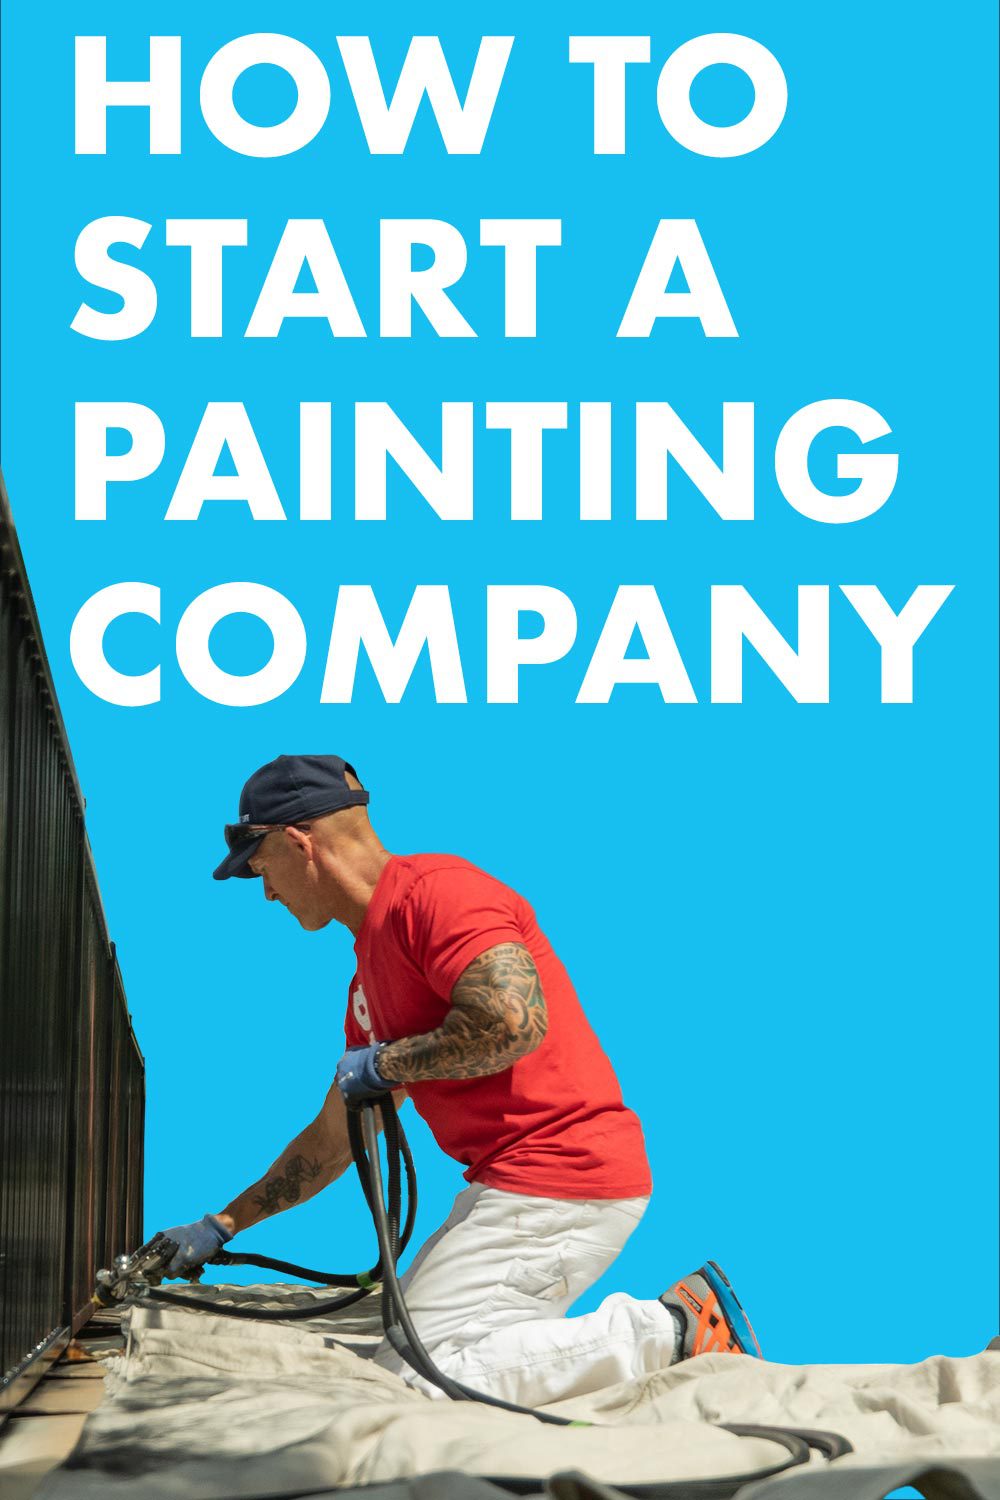 How To Start A Painting Company